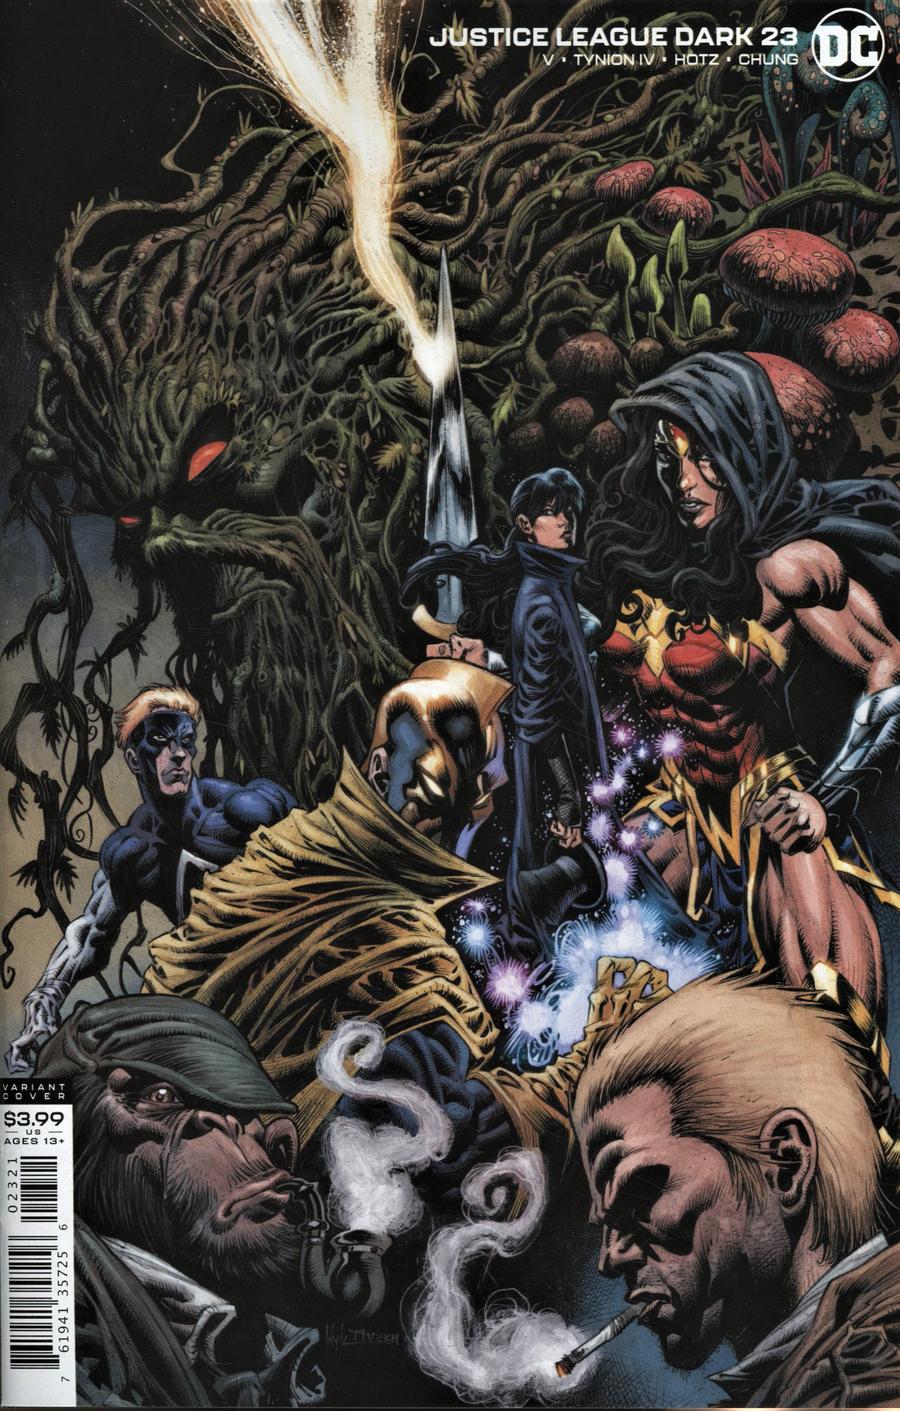 Justice League Dark Vol 2 #23 Cover B Variant Kyle Hotz Cover